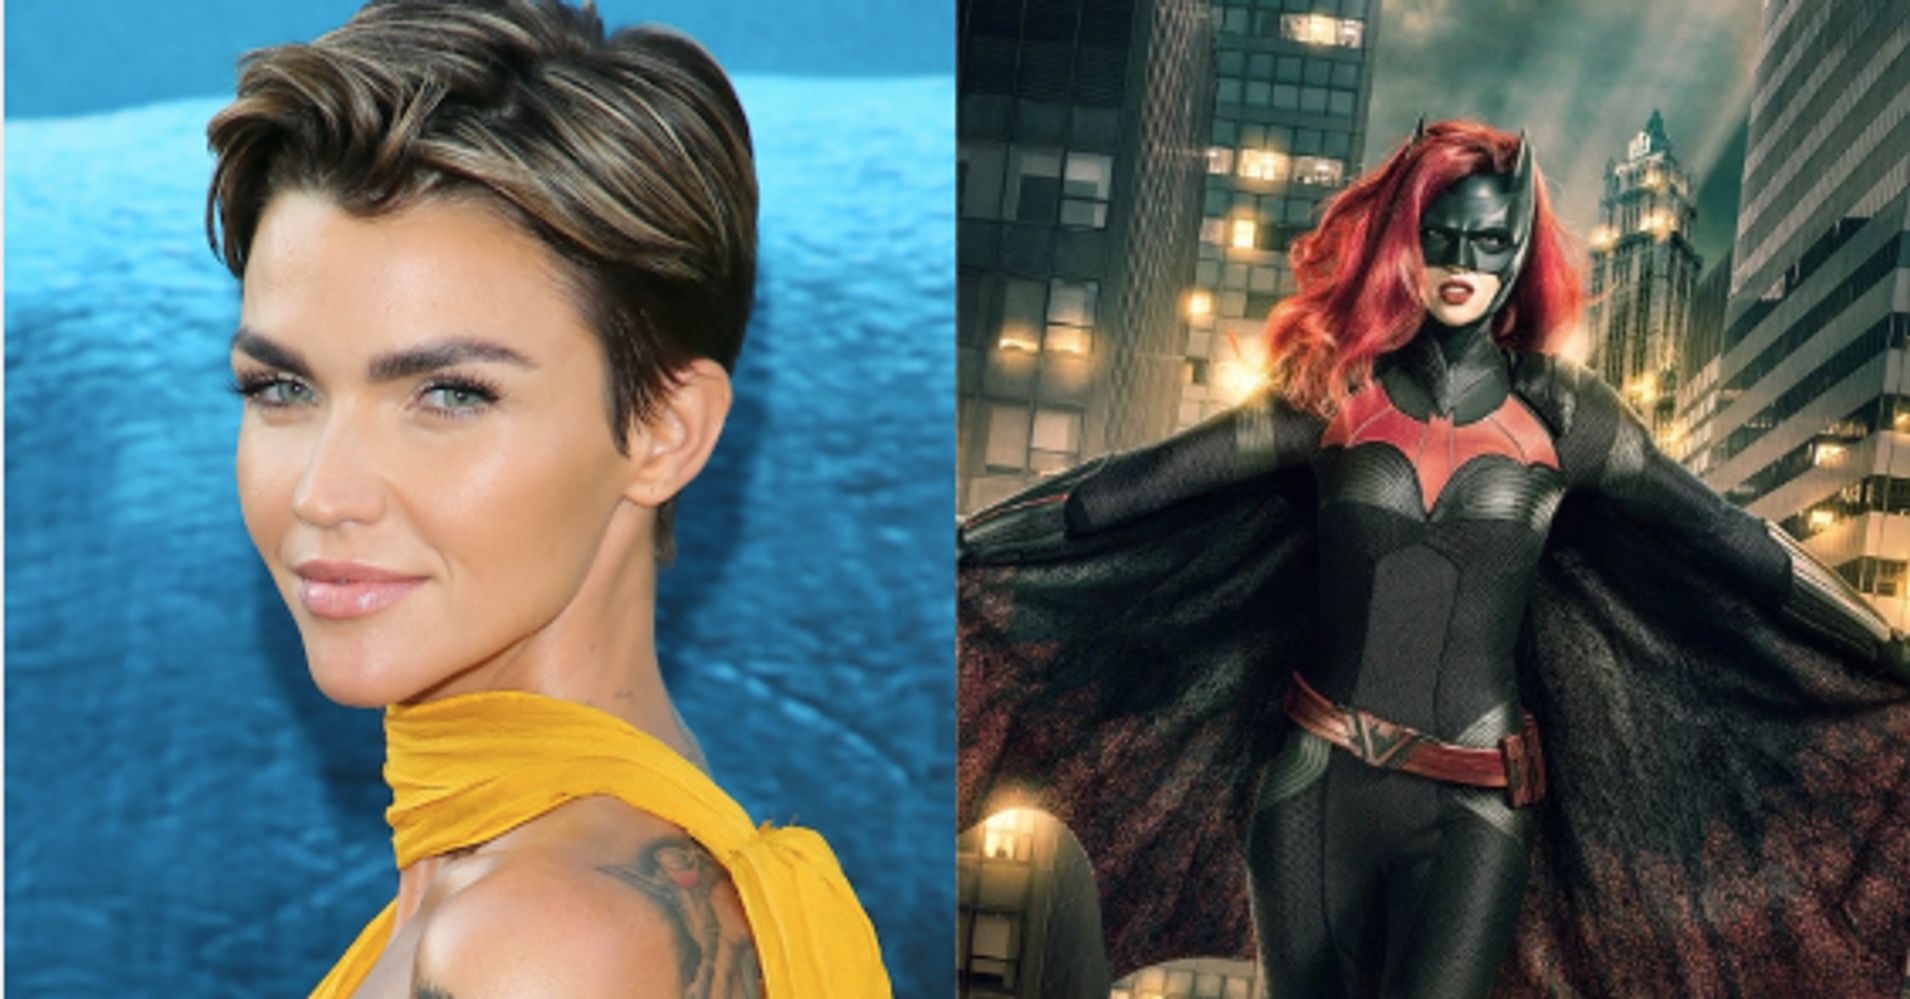 Ruby Rose Suits Up As Batwoman In First Look At Arrowverse Crossover